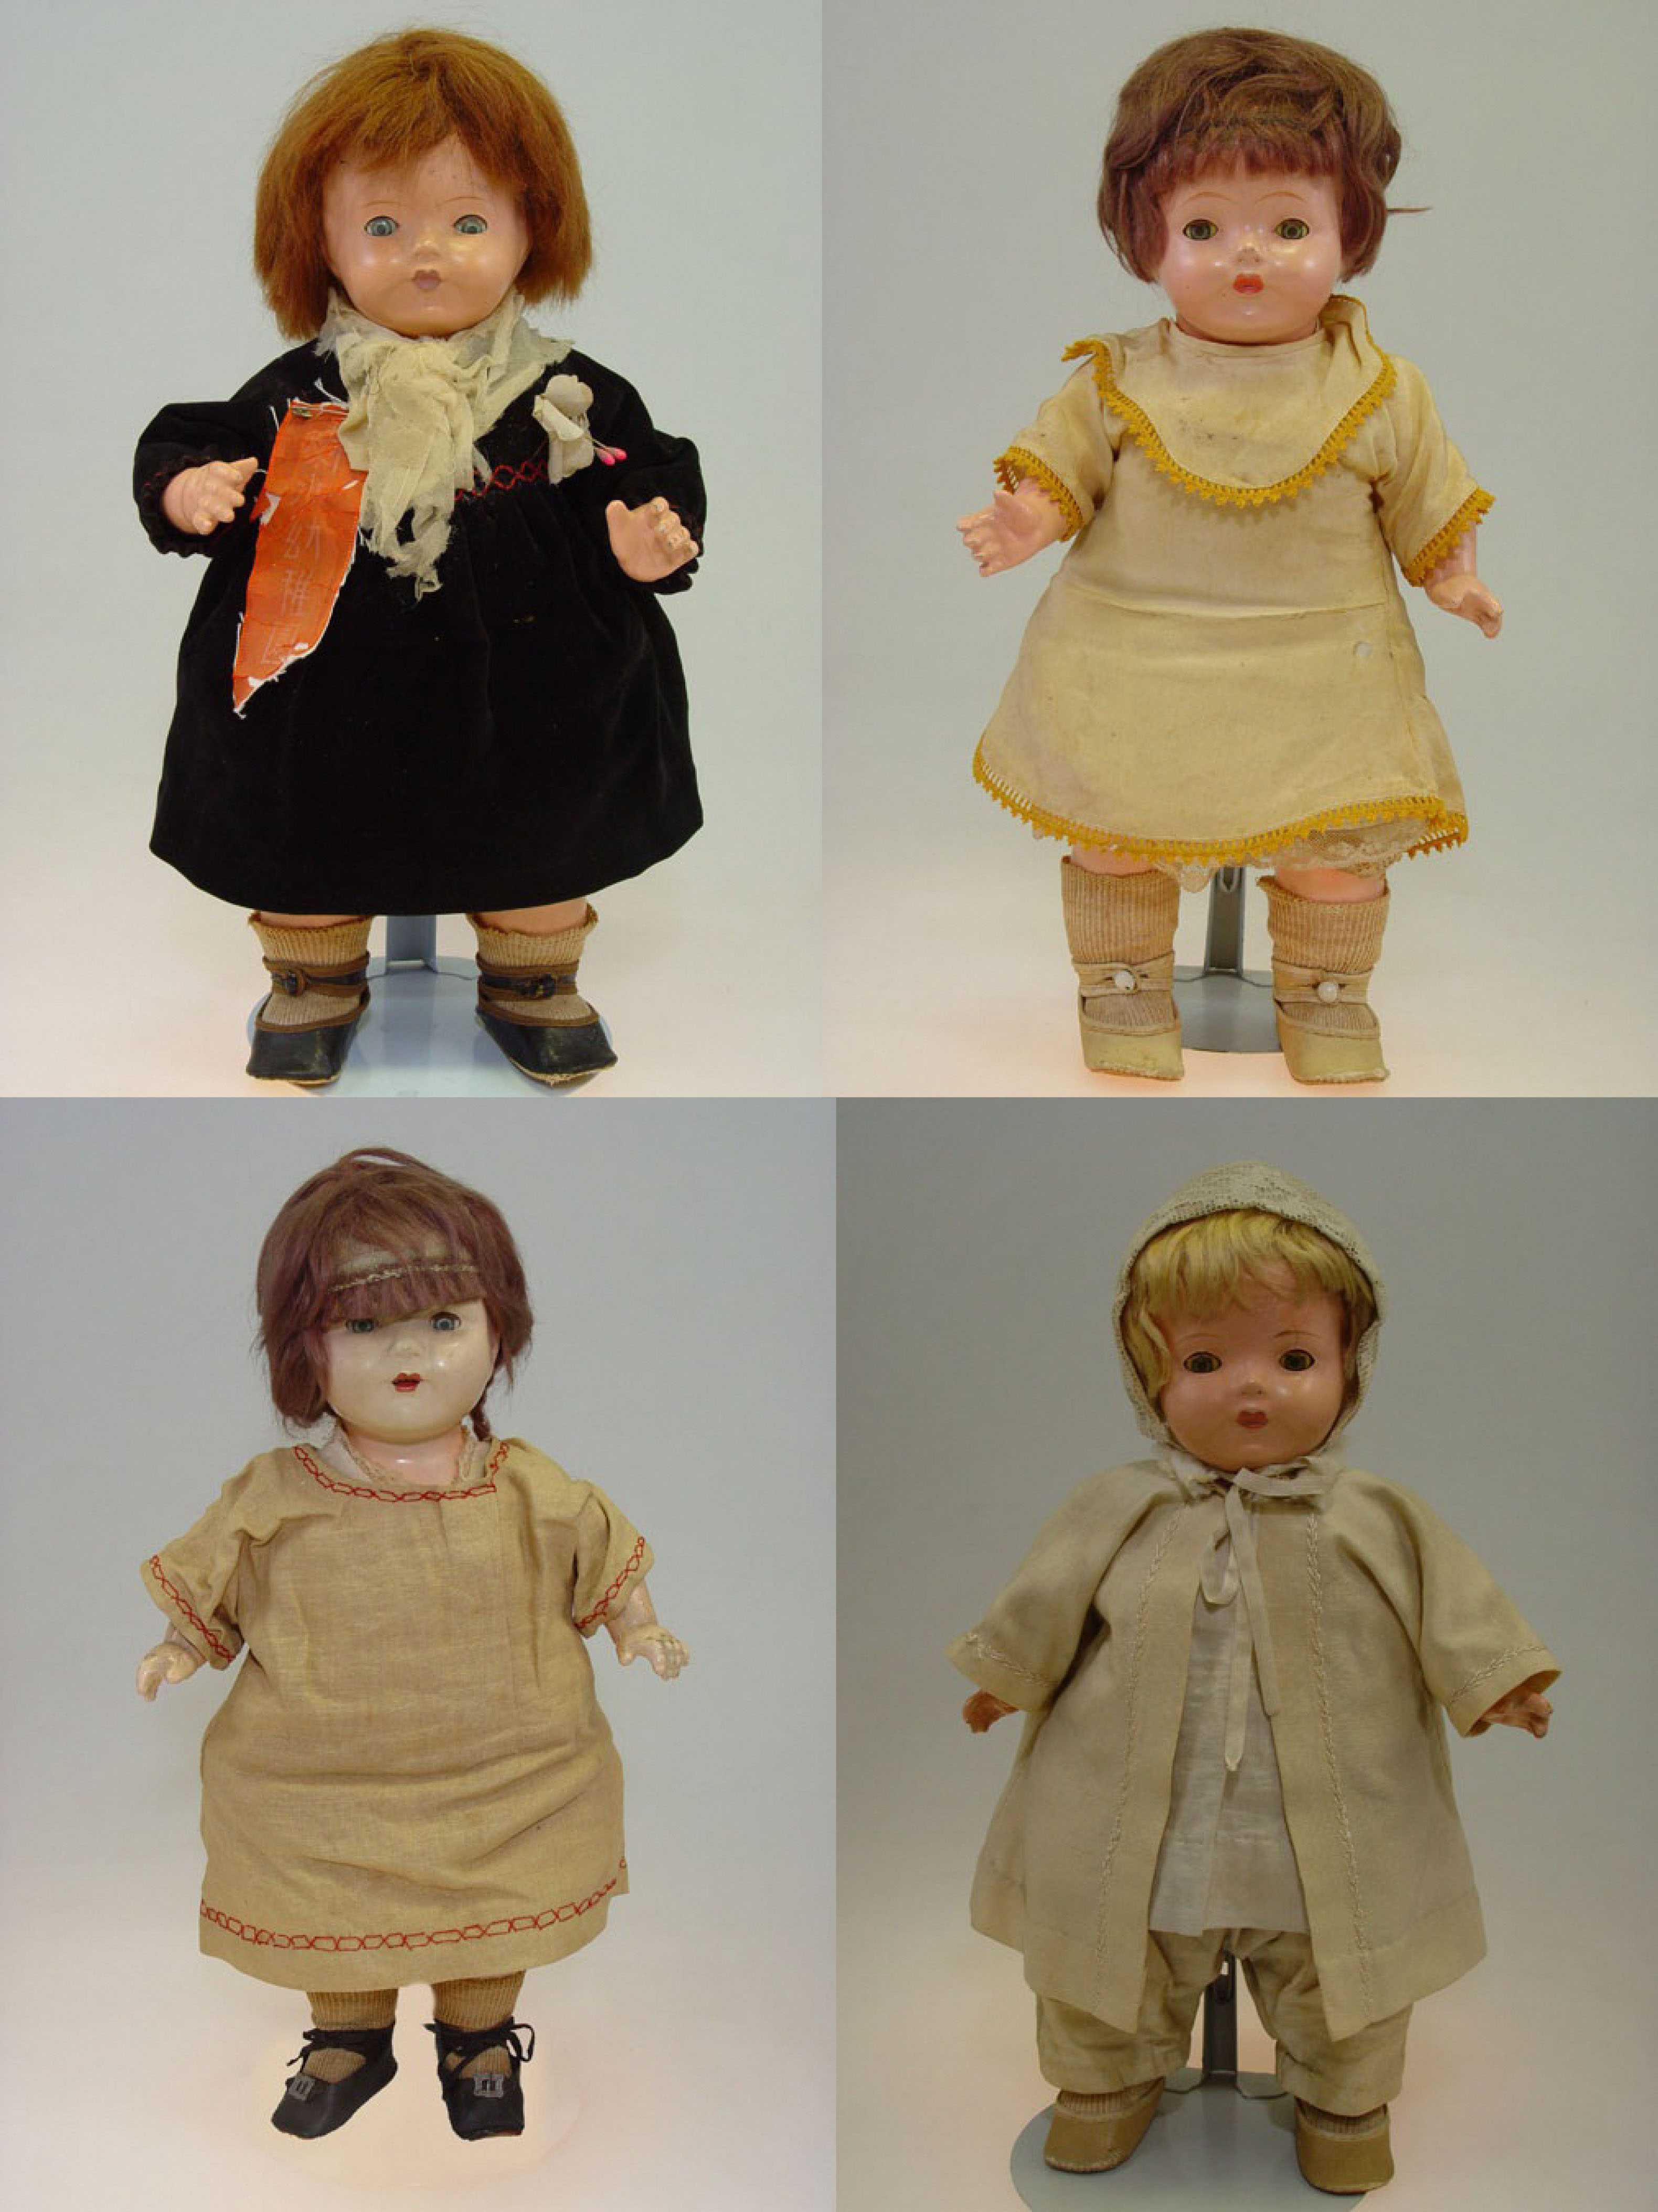 Blue-eyed Dolls in various costumes